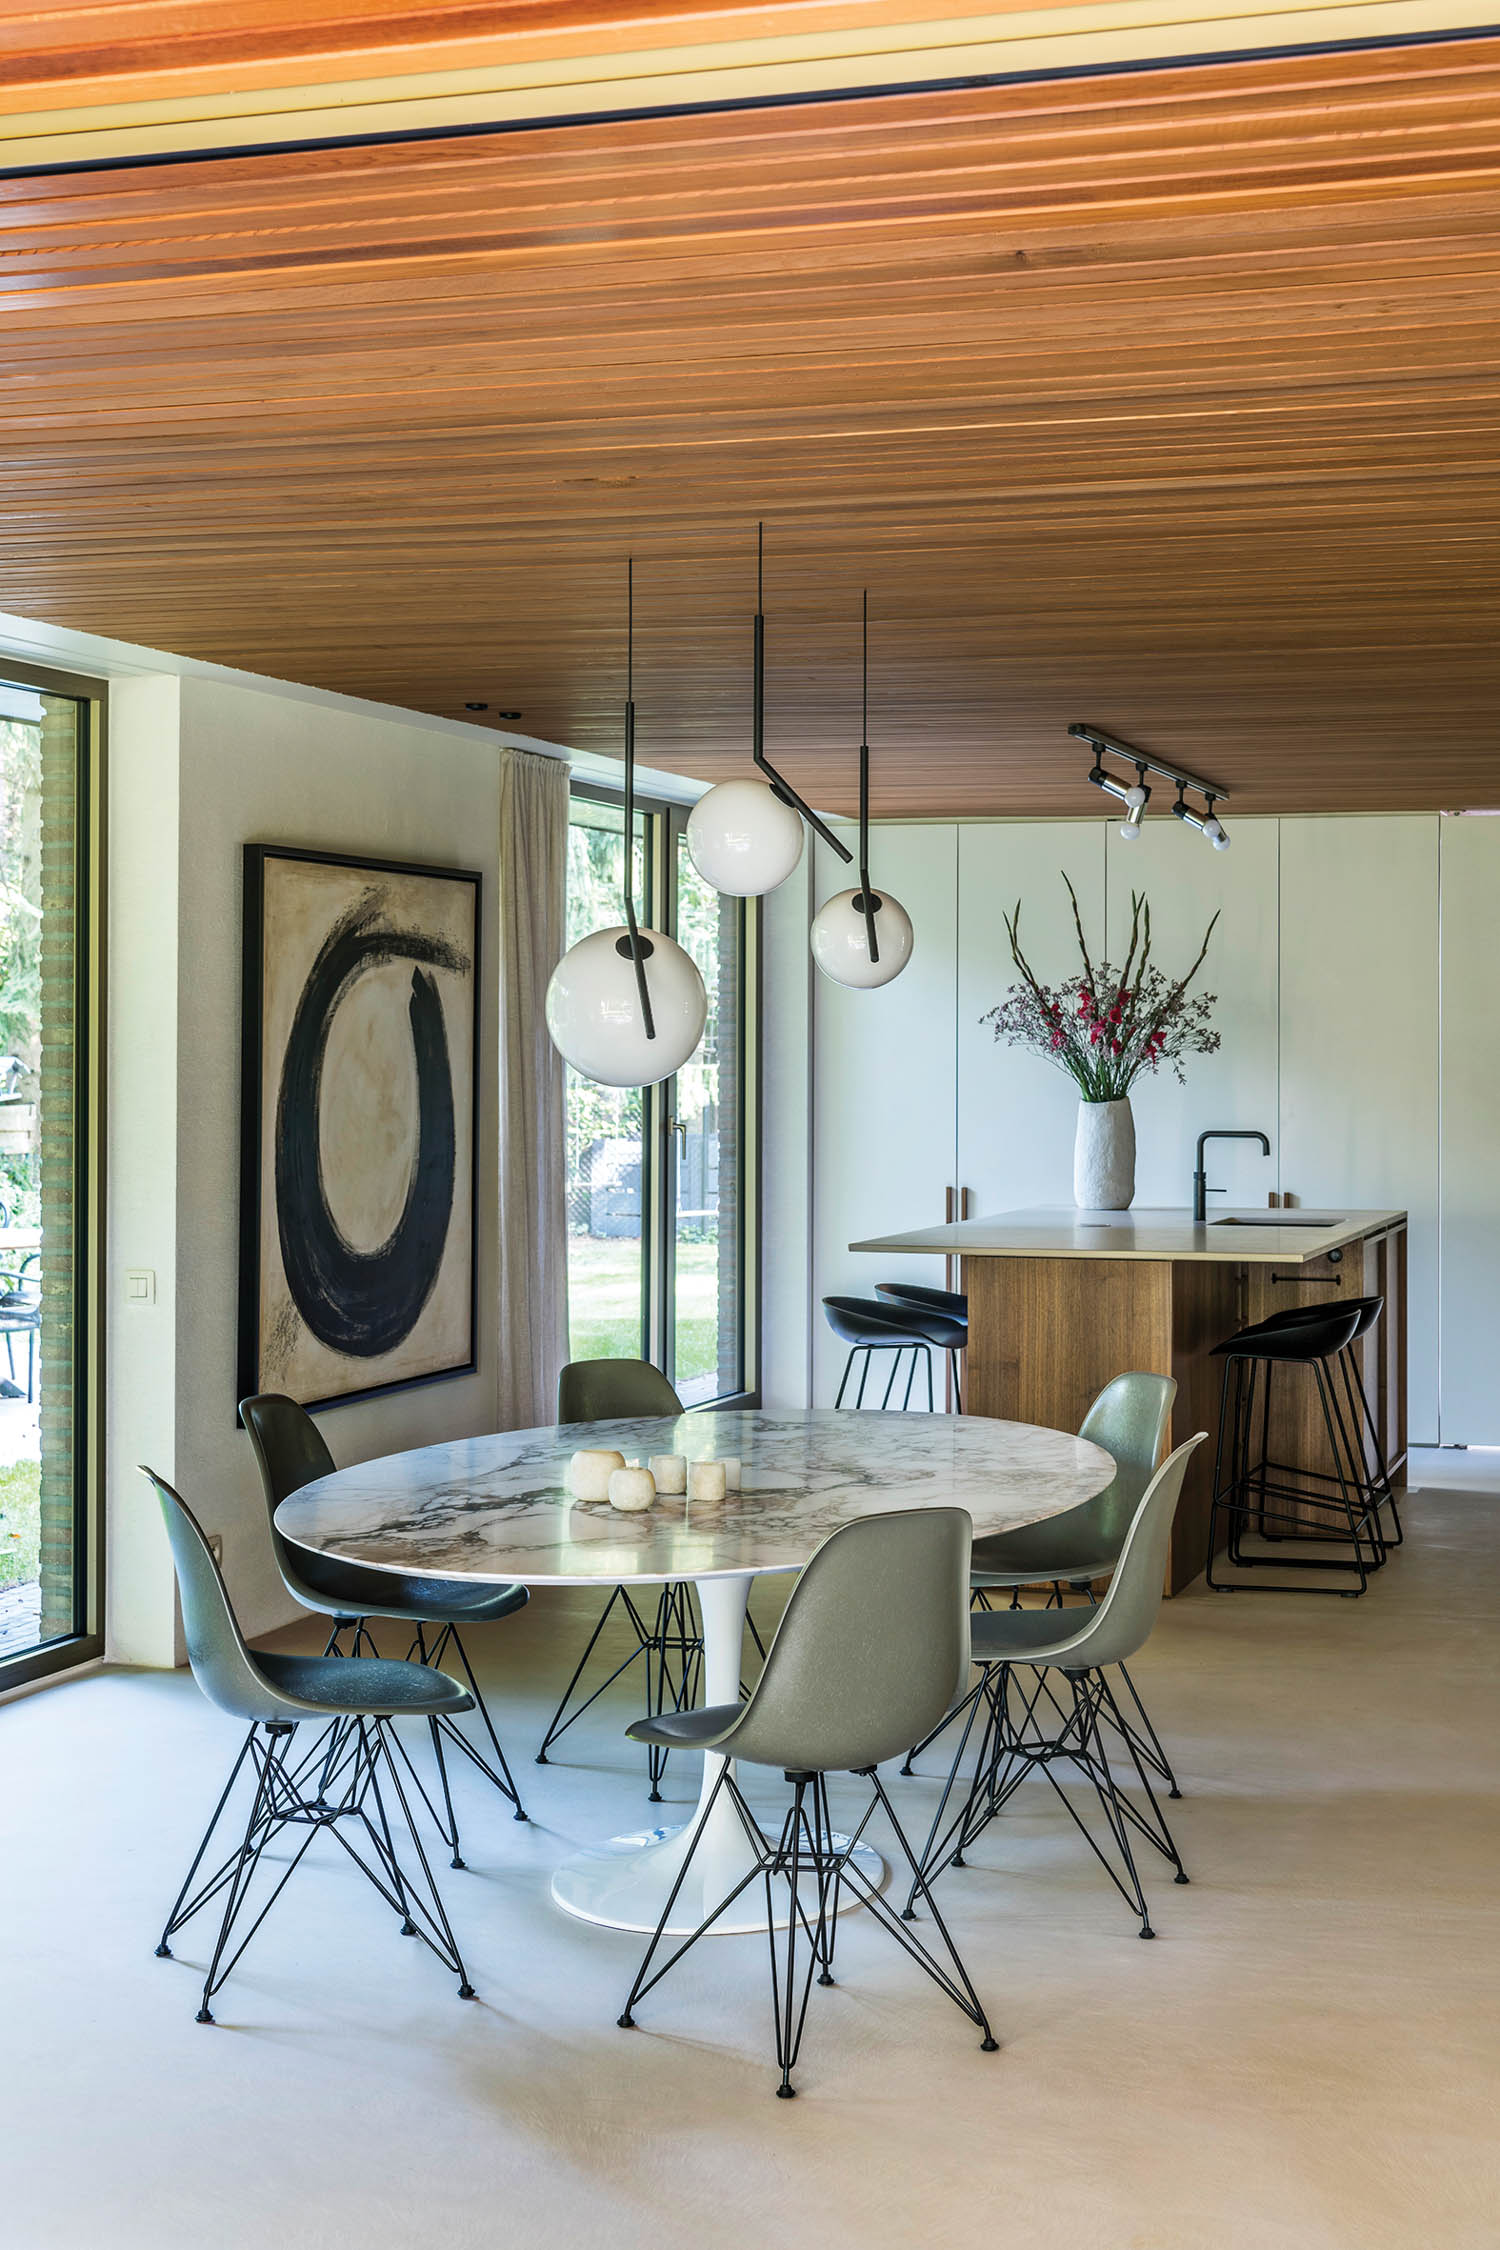 the dining area of a modernized home renovation